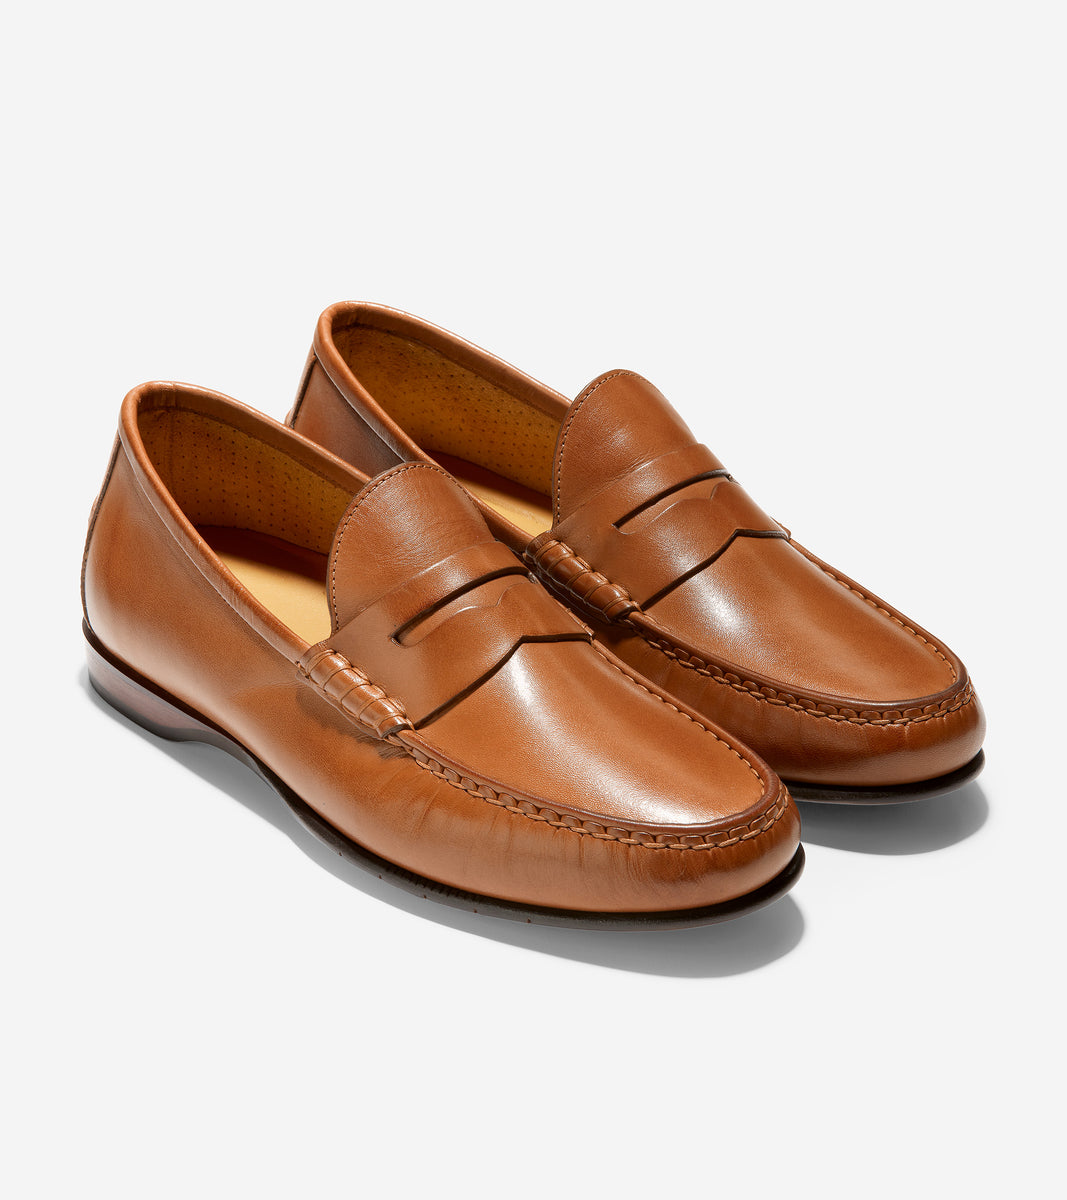 ColeHaan-Hayes Penny Loafer-c31208-Saddle Tan Leather